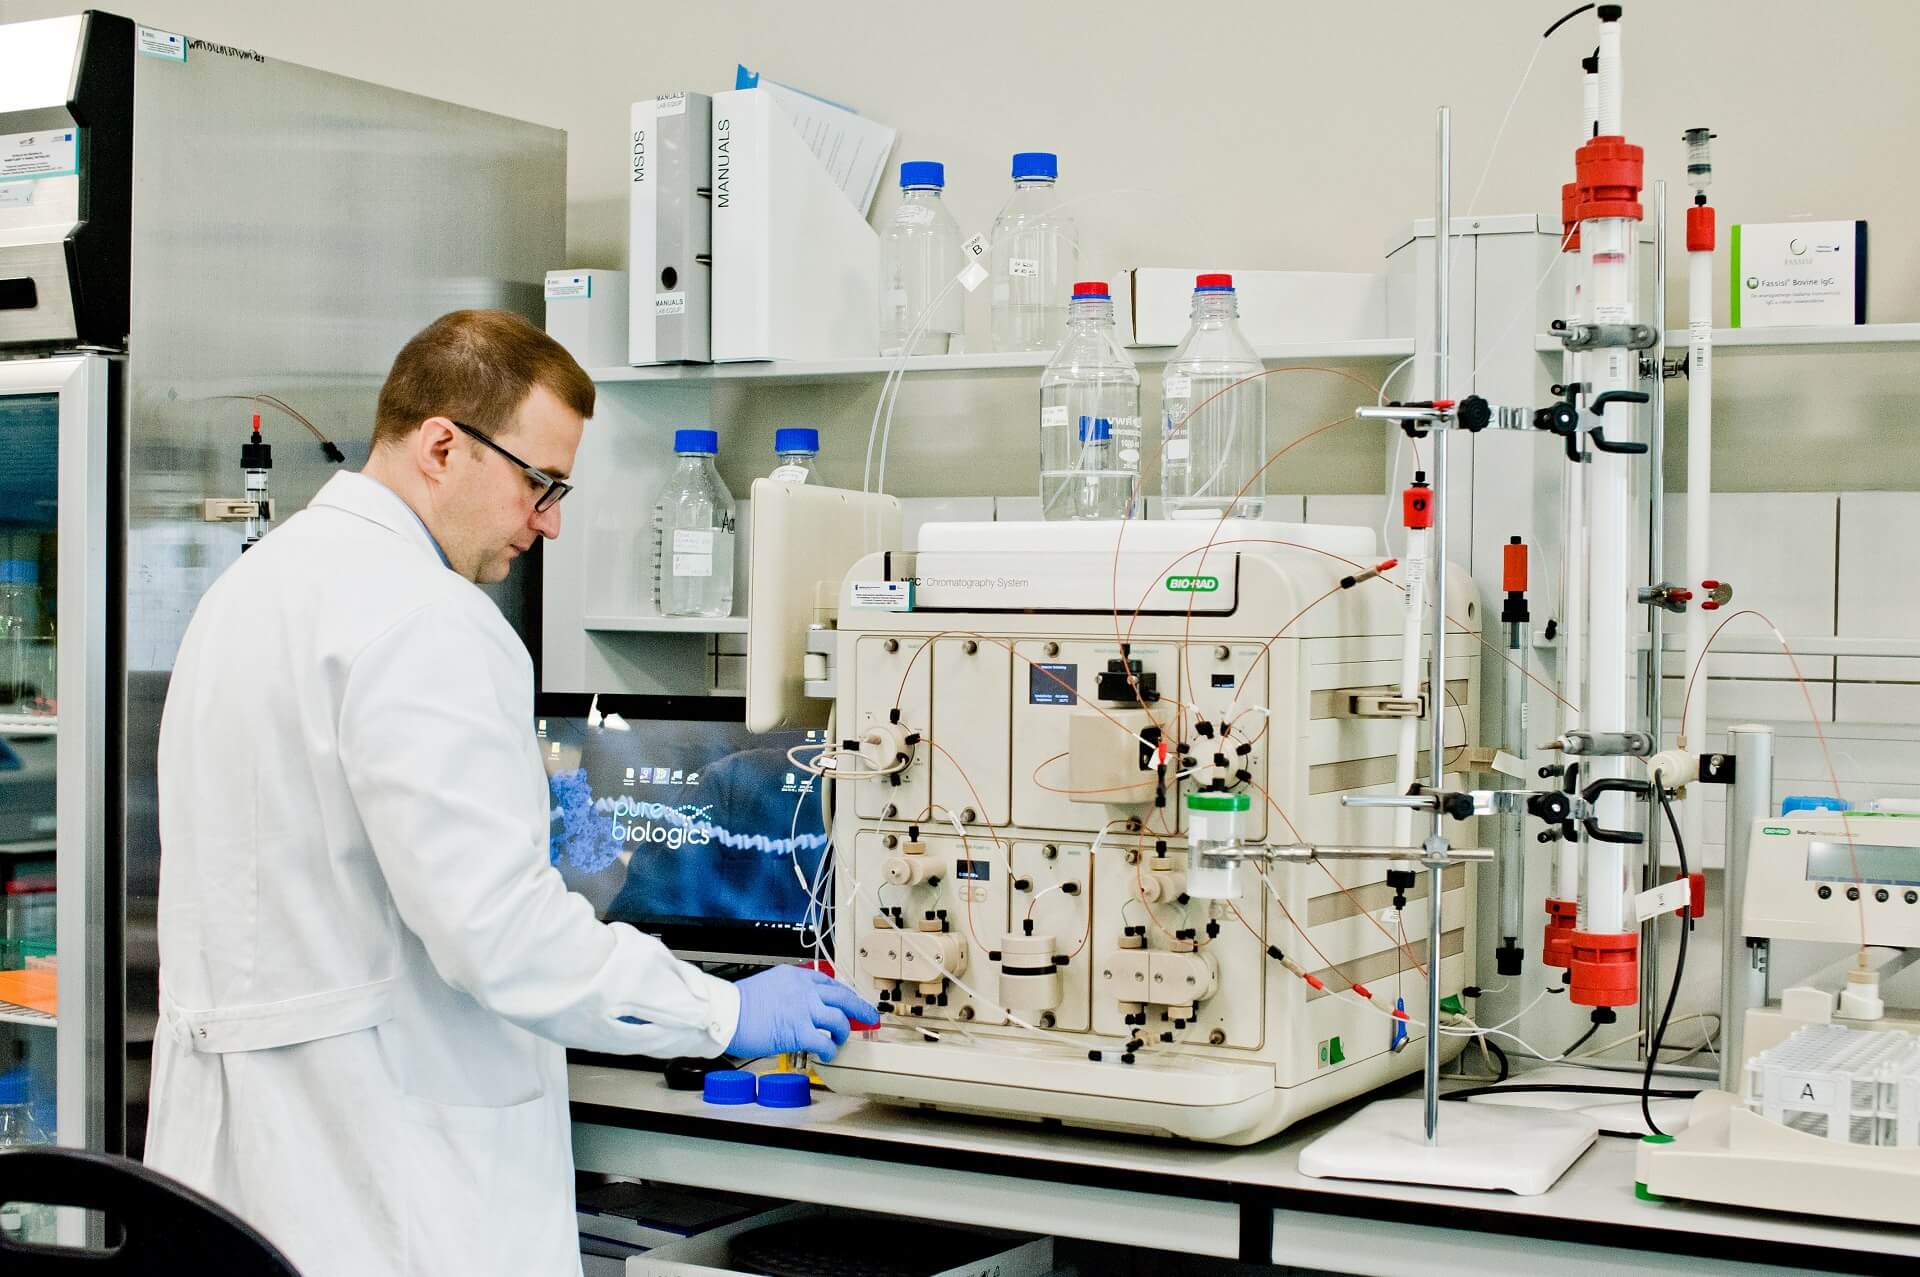 Maciej Mazurek, Director of the Department of Science and Innovation at Pure Biologics S.A., in a white coat, while working in the laboratory, at the table with the apparatus